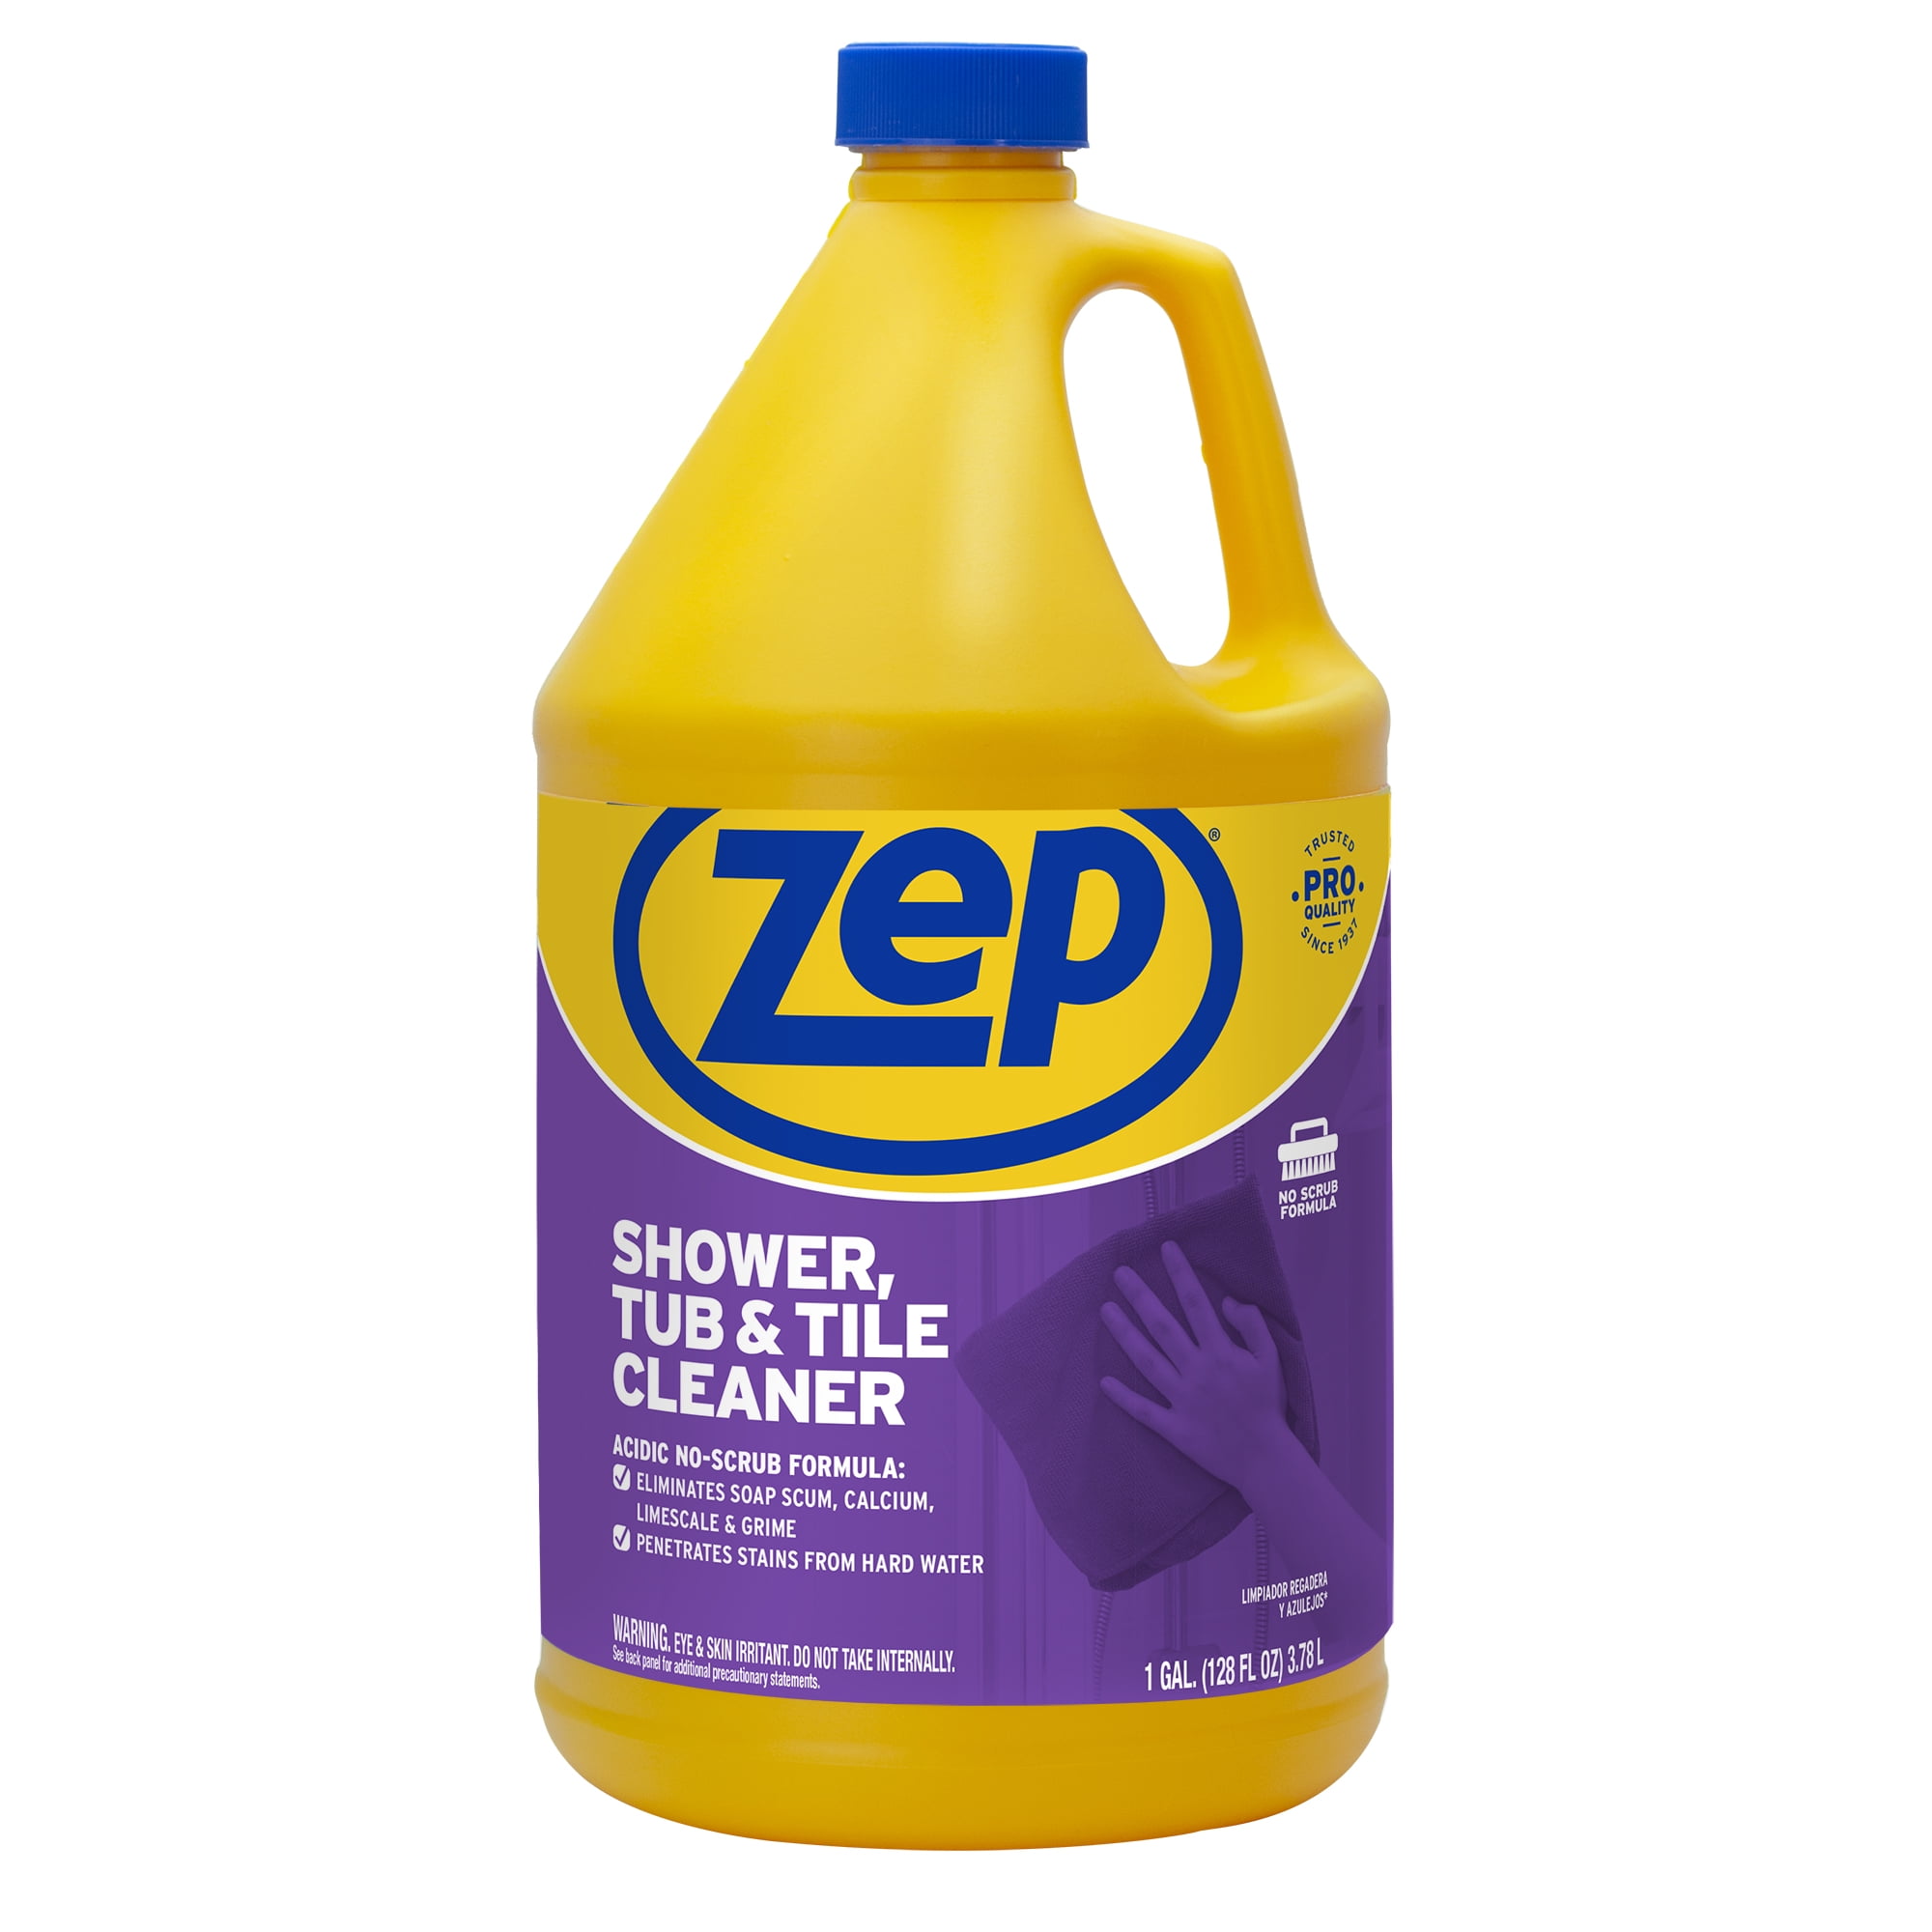 Zep Foaming Shower Tub and Tile Cleaner - 32 Ounce (Case of 4) ZUPFTT324 - No Scrub Formula, Breaks Up Tough Buildup on Contact